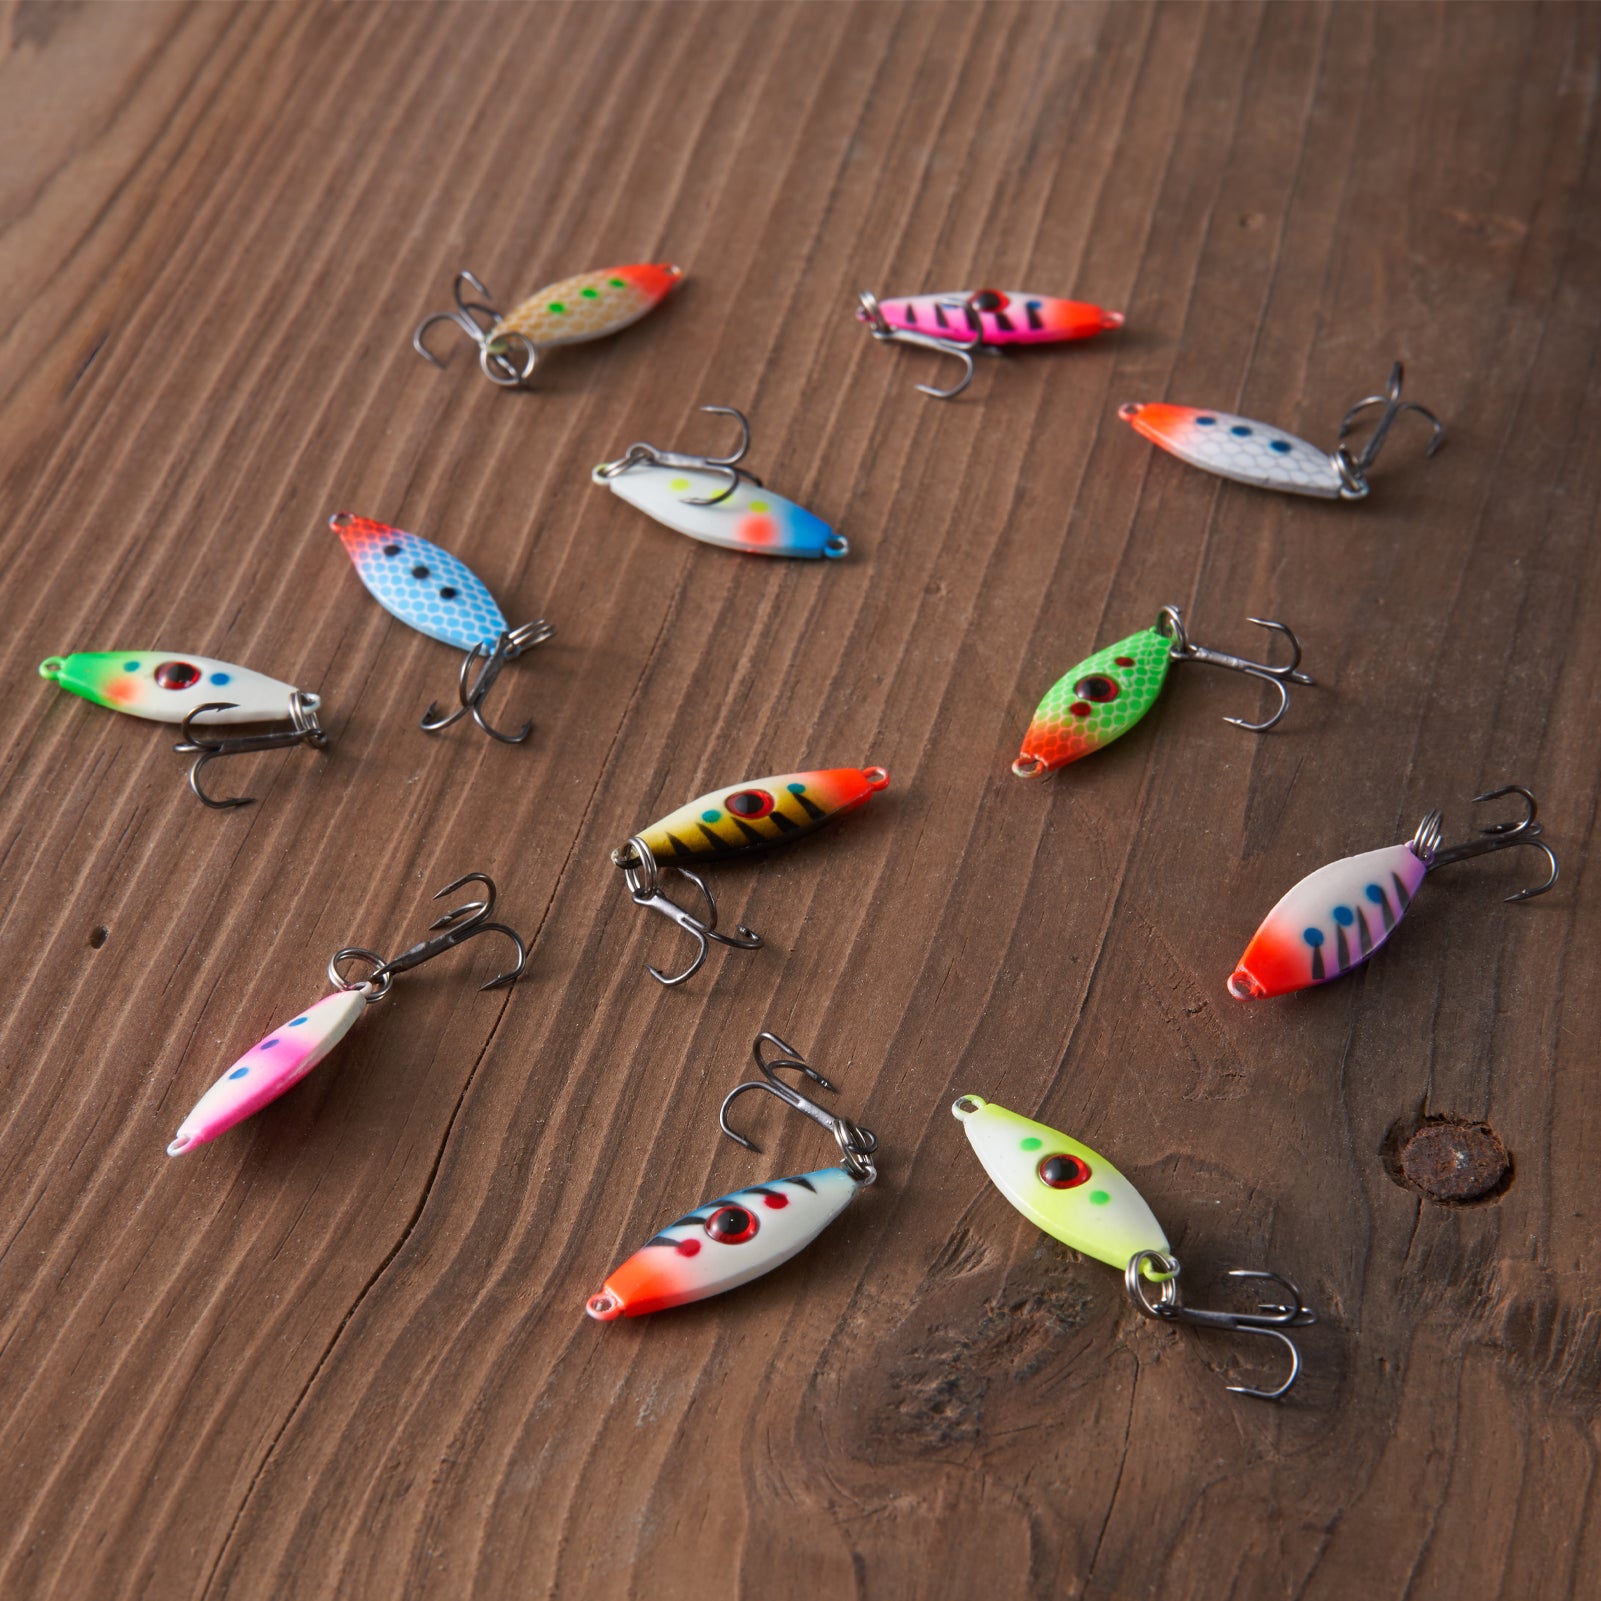 Assorted GLOWS Small Cricket Ice Fishing Lures Baits Crappies Walleyes